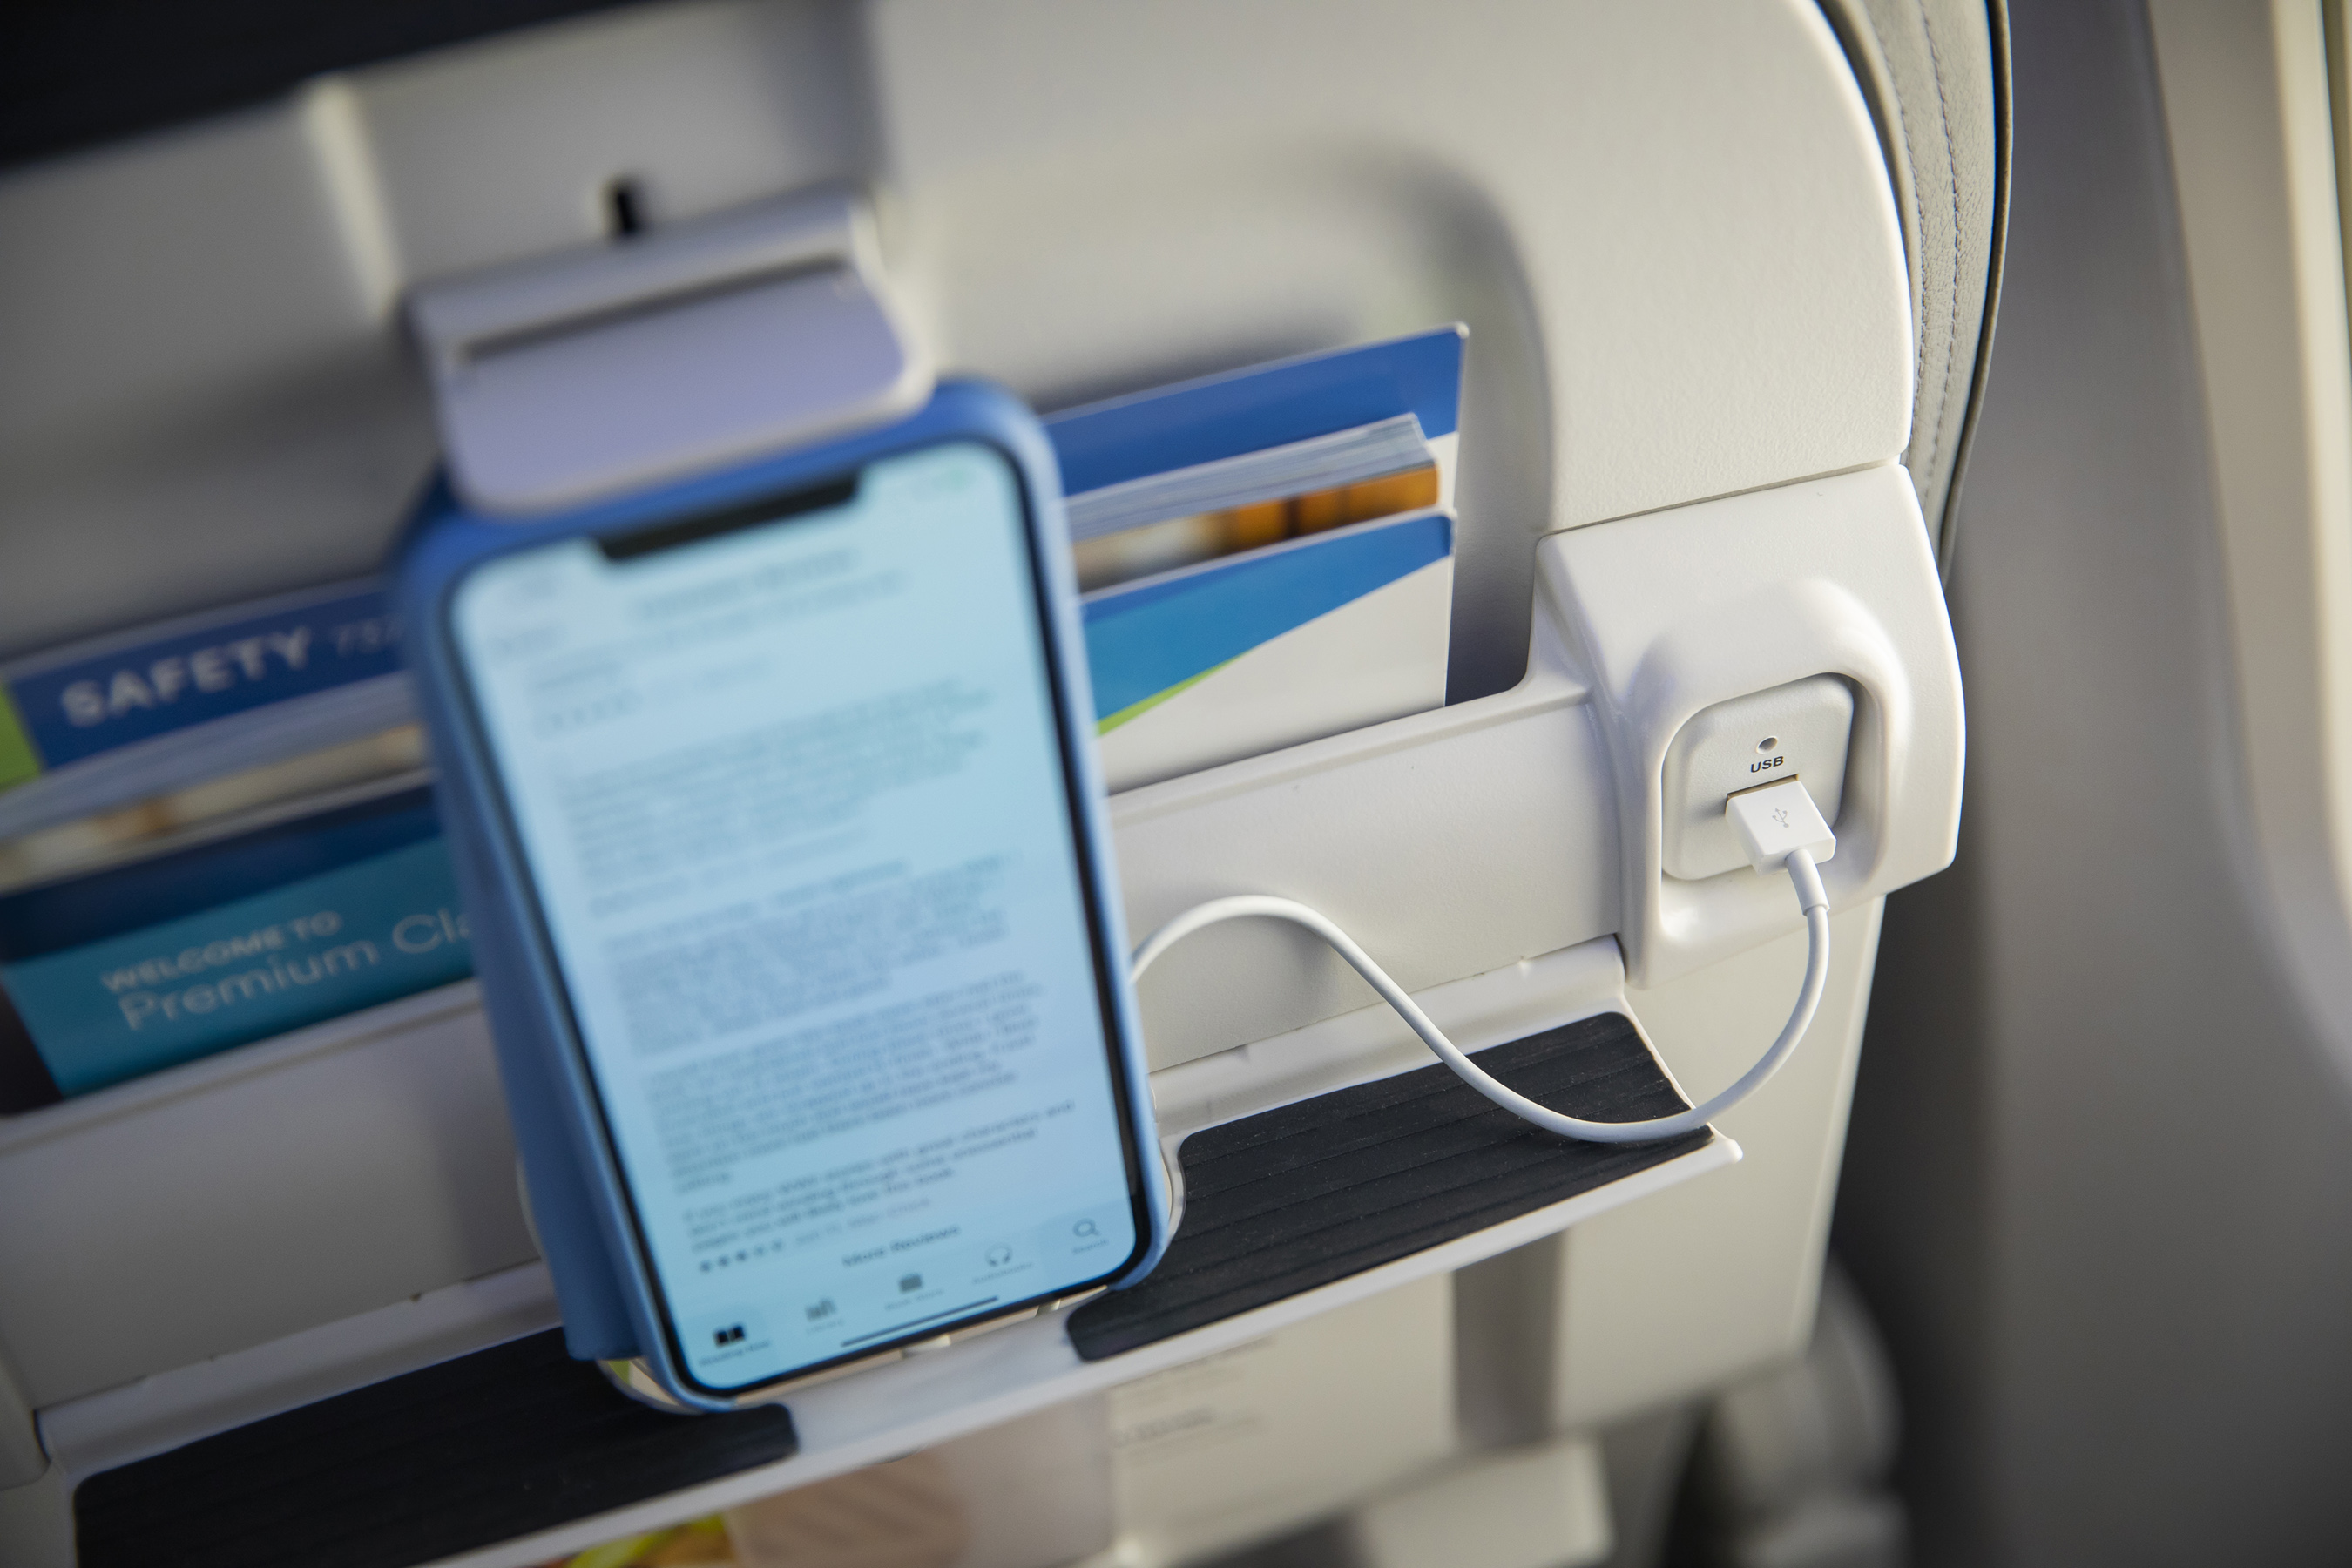 Alaska Airlines’ ergonomically-friendly tablet holders and a seatback shelf at each seat make most tablets and smartphones easy to view and secure.